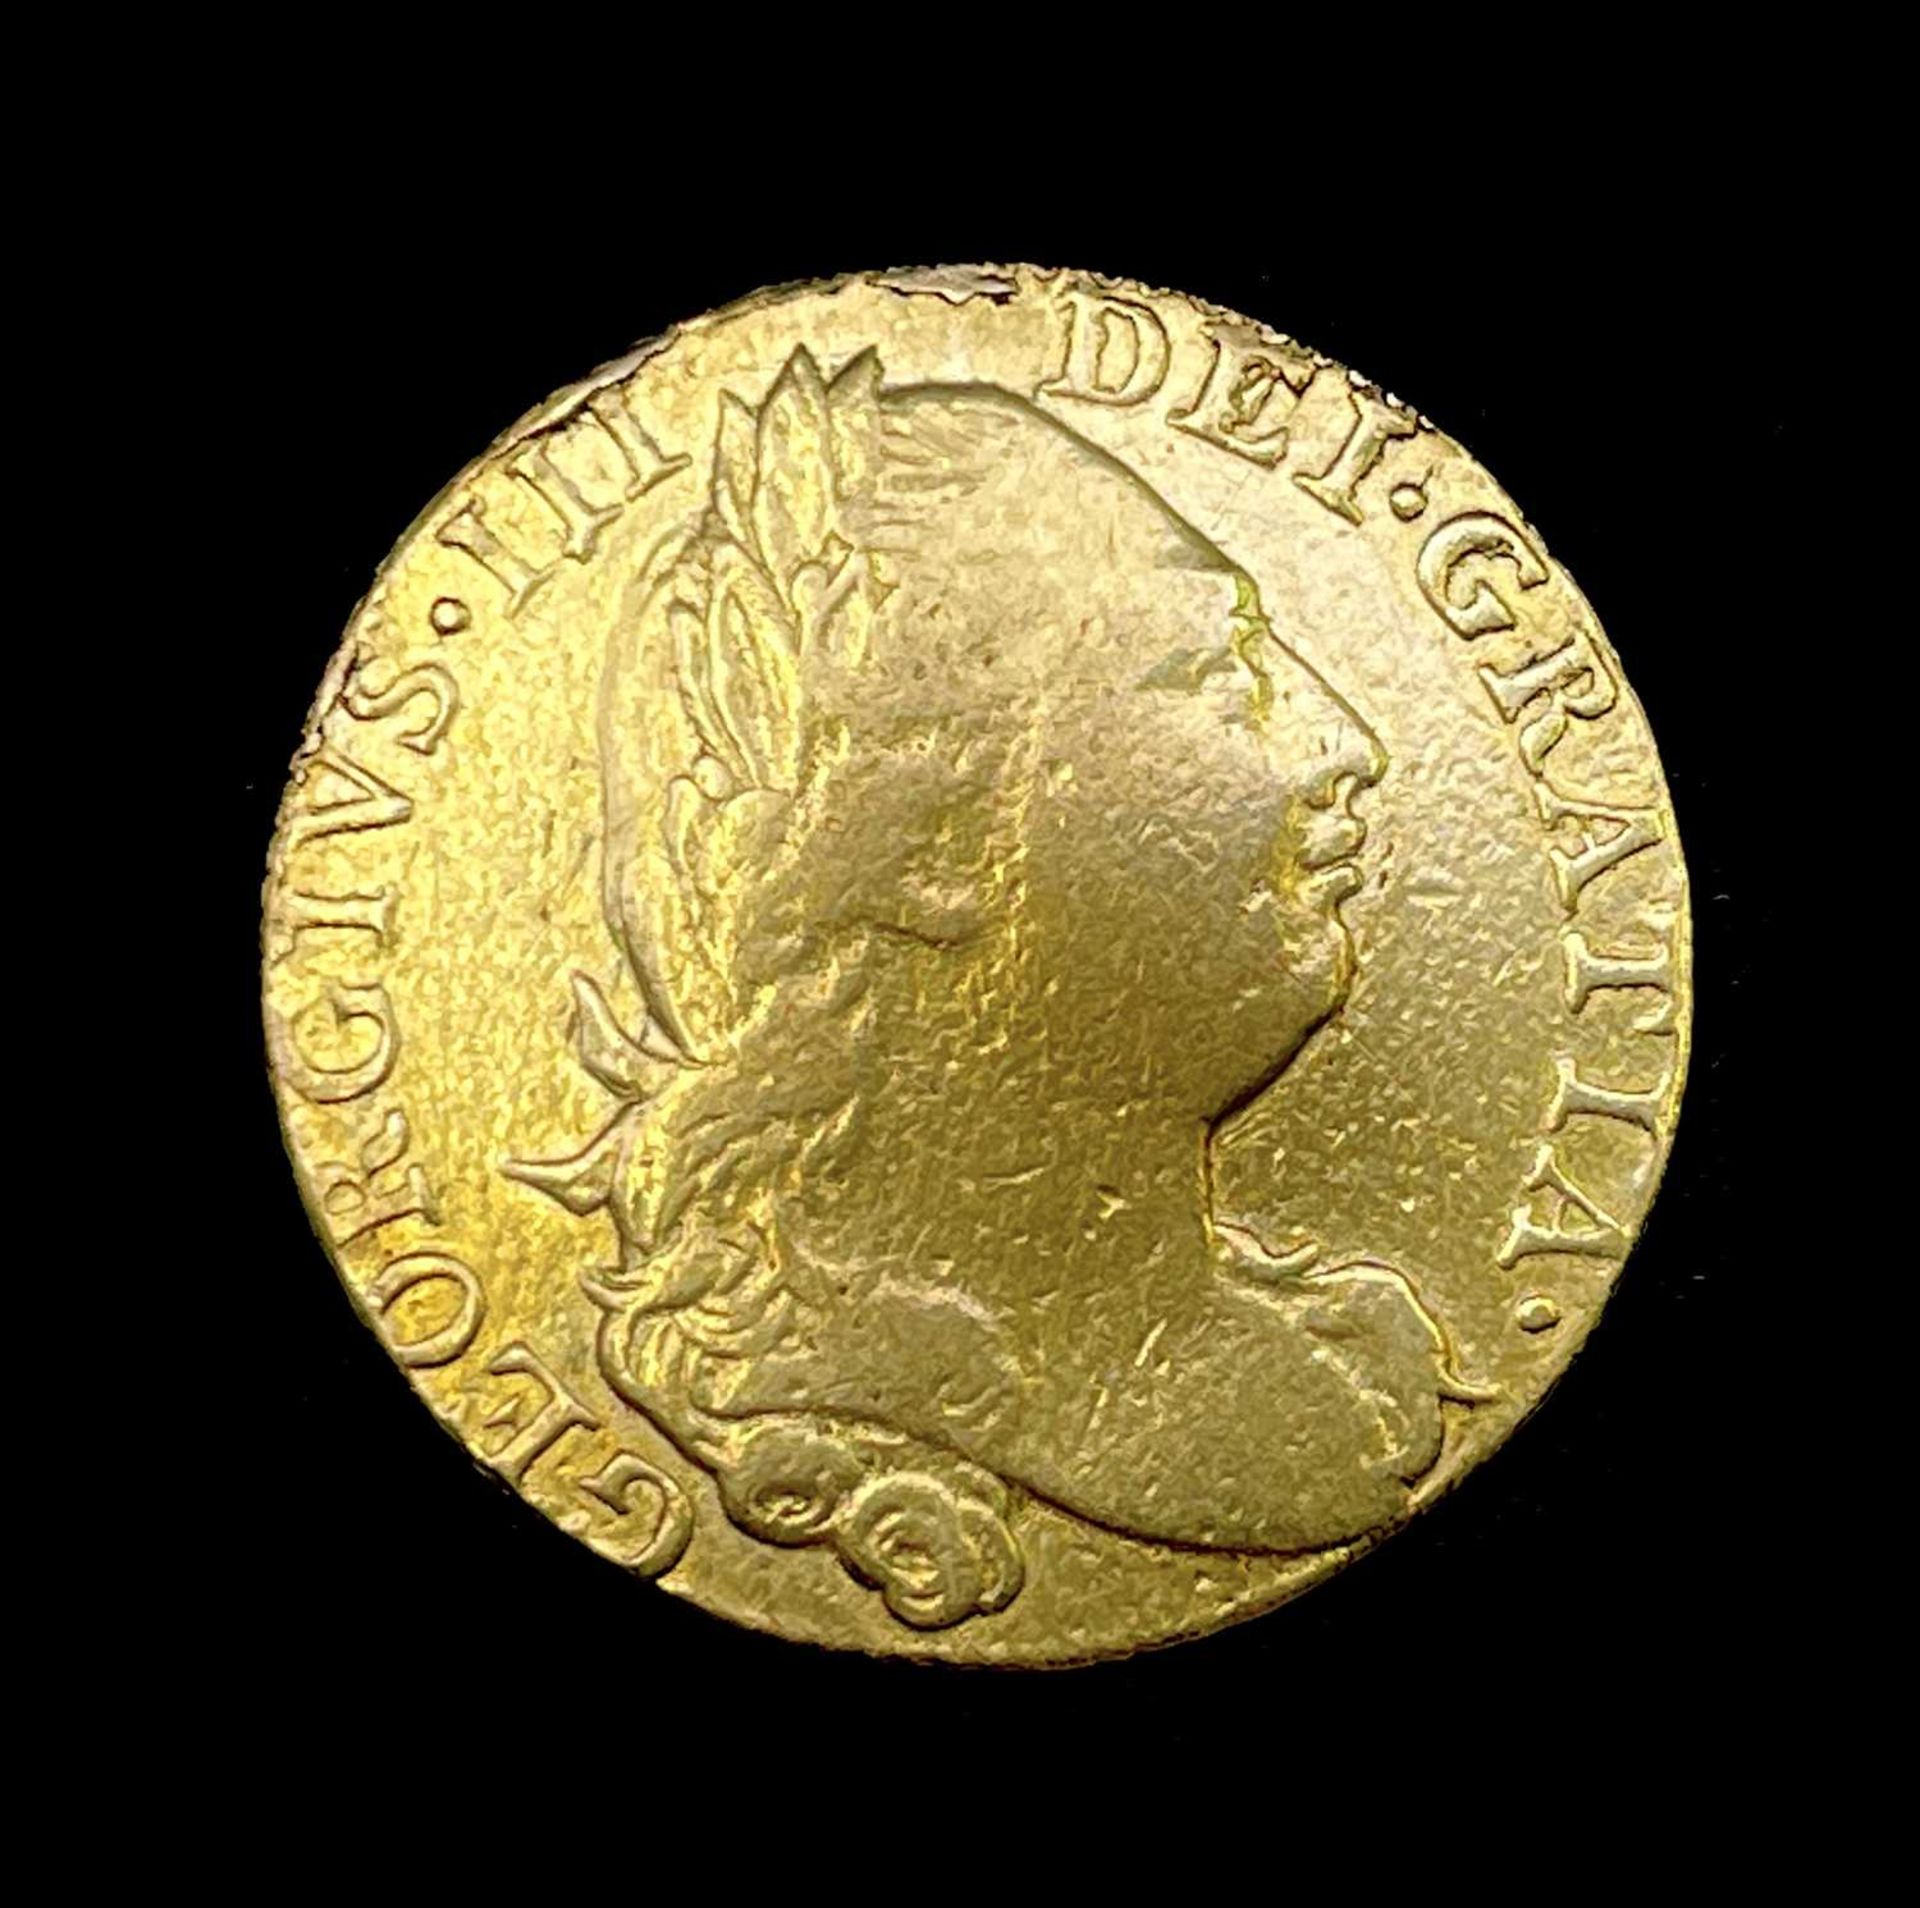 Great Britain Gold Guinea 1775 Condition: please request a condition report if you require - Image 2 of 2